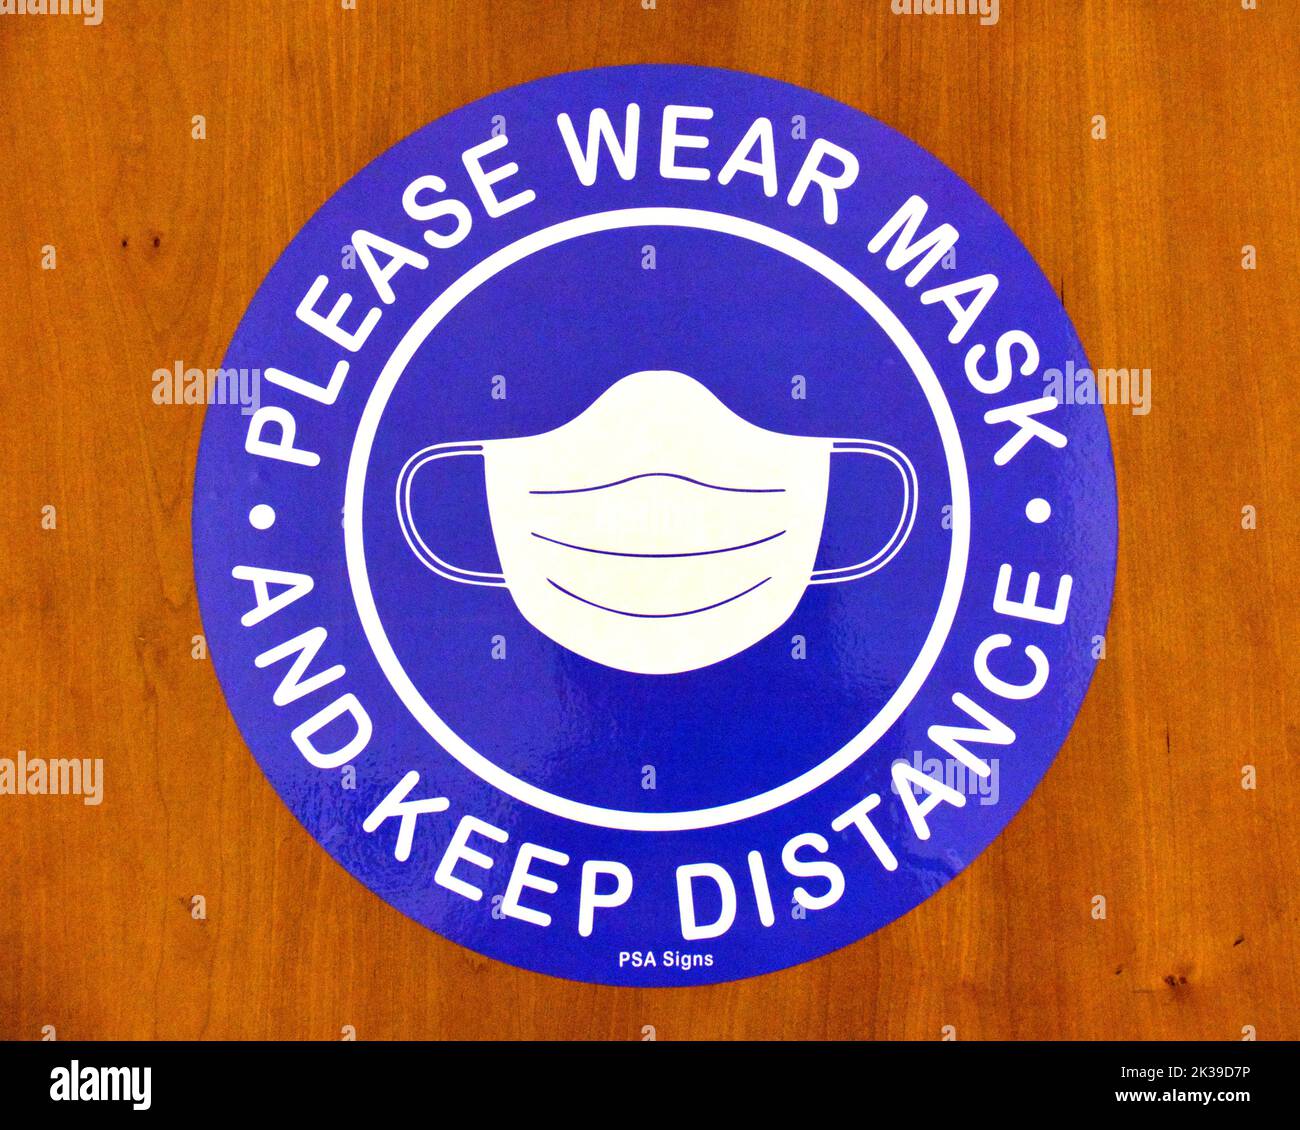 please wear mask and keep distance sign on door Stock Photo